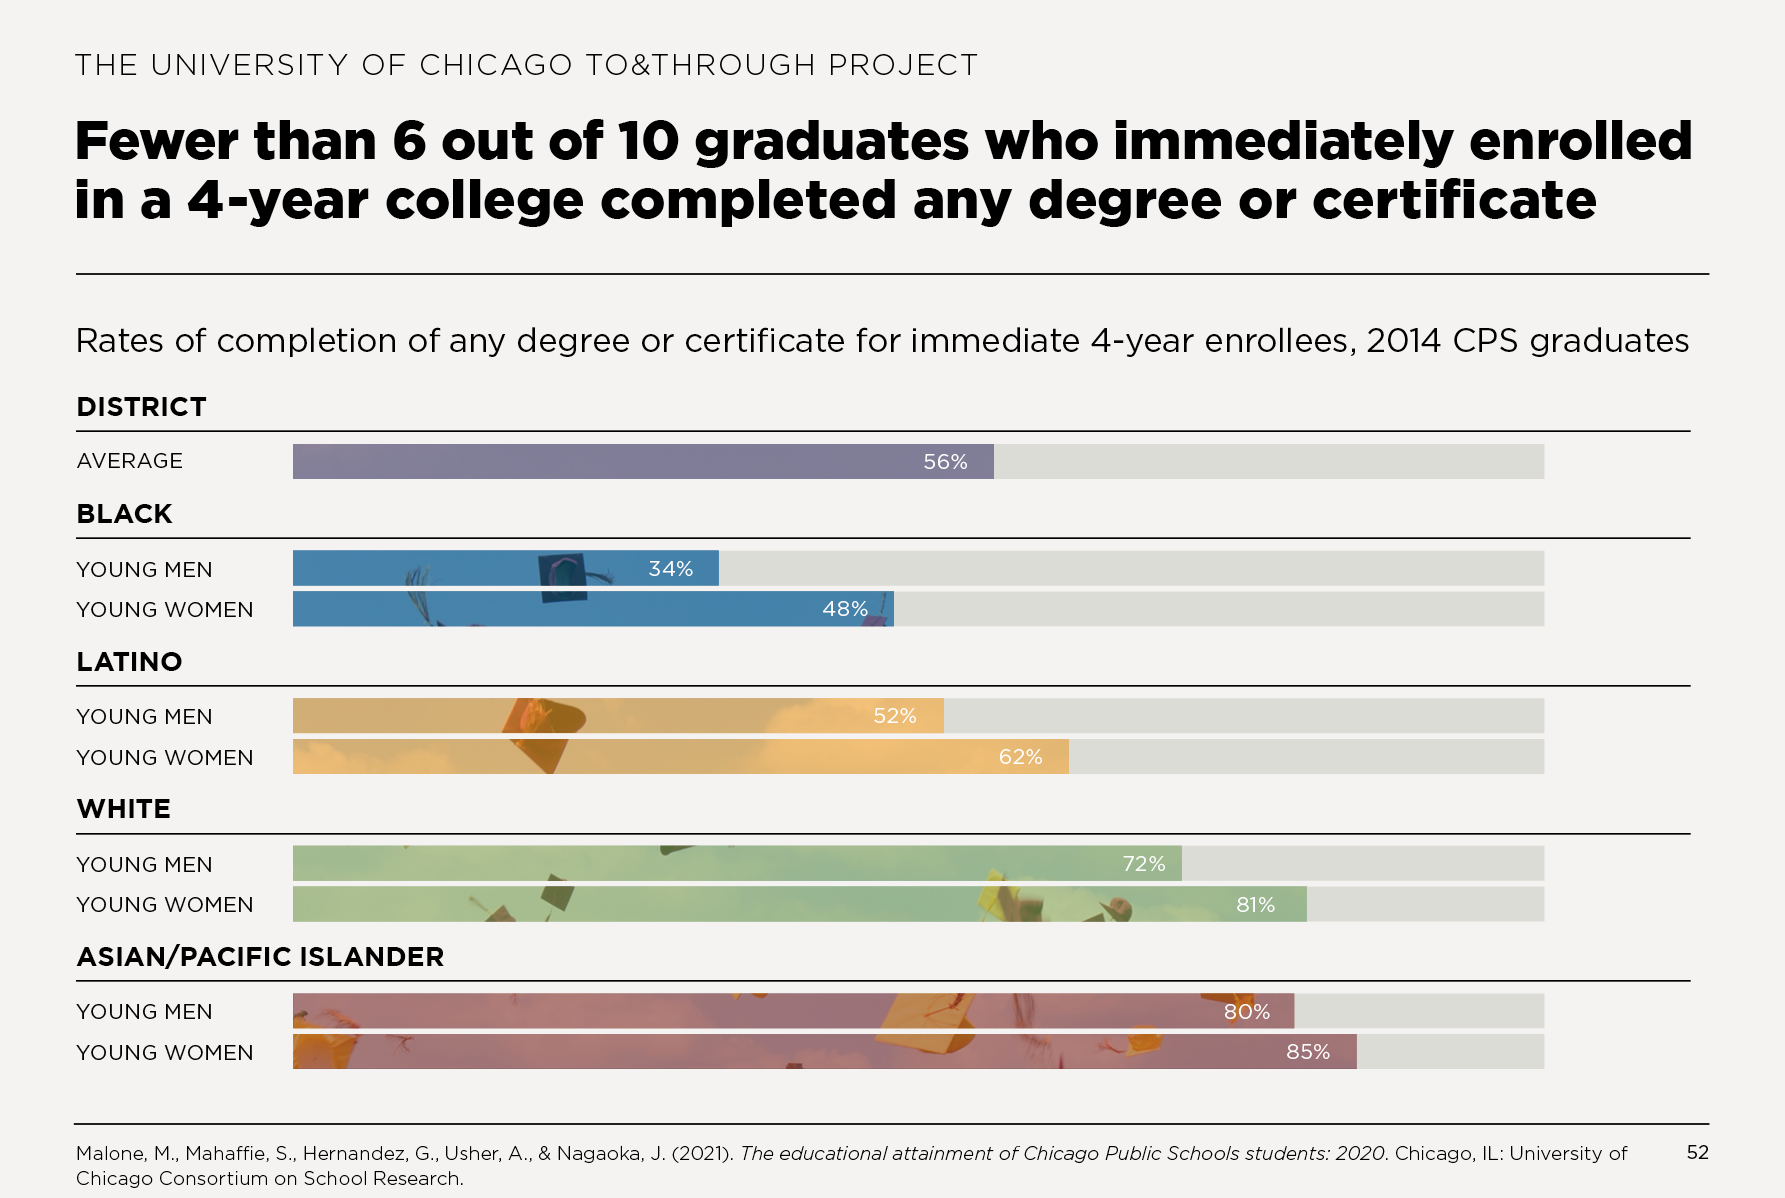 Fewer than 6 out of 10 graduates who immediately enrolled in a 4-year college completed any degree or certificate